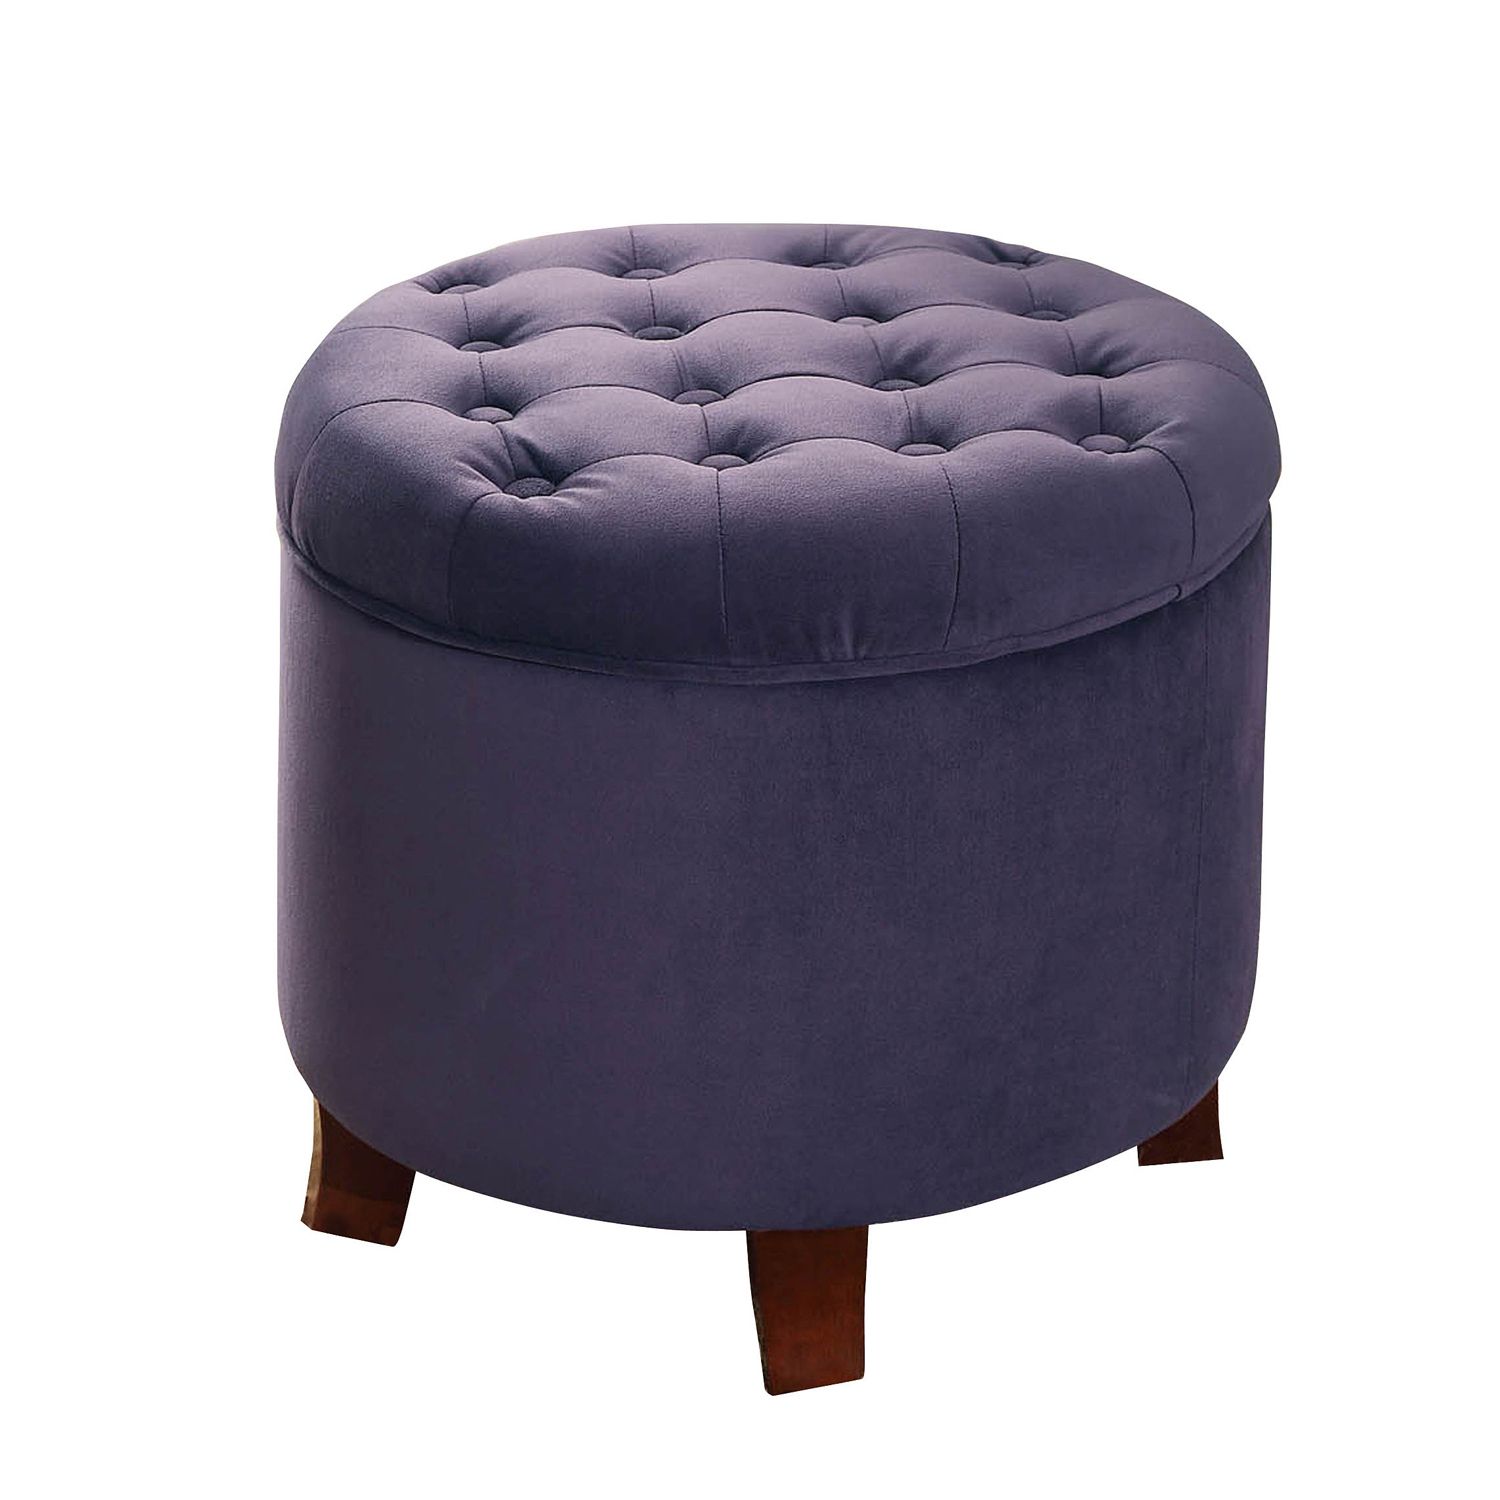 Most Current Purple Velvet Tufted Round Storage Ottoman – Pier1 Imports With Fabric Tufted Round Storage Ottomans (View 1 of 10)